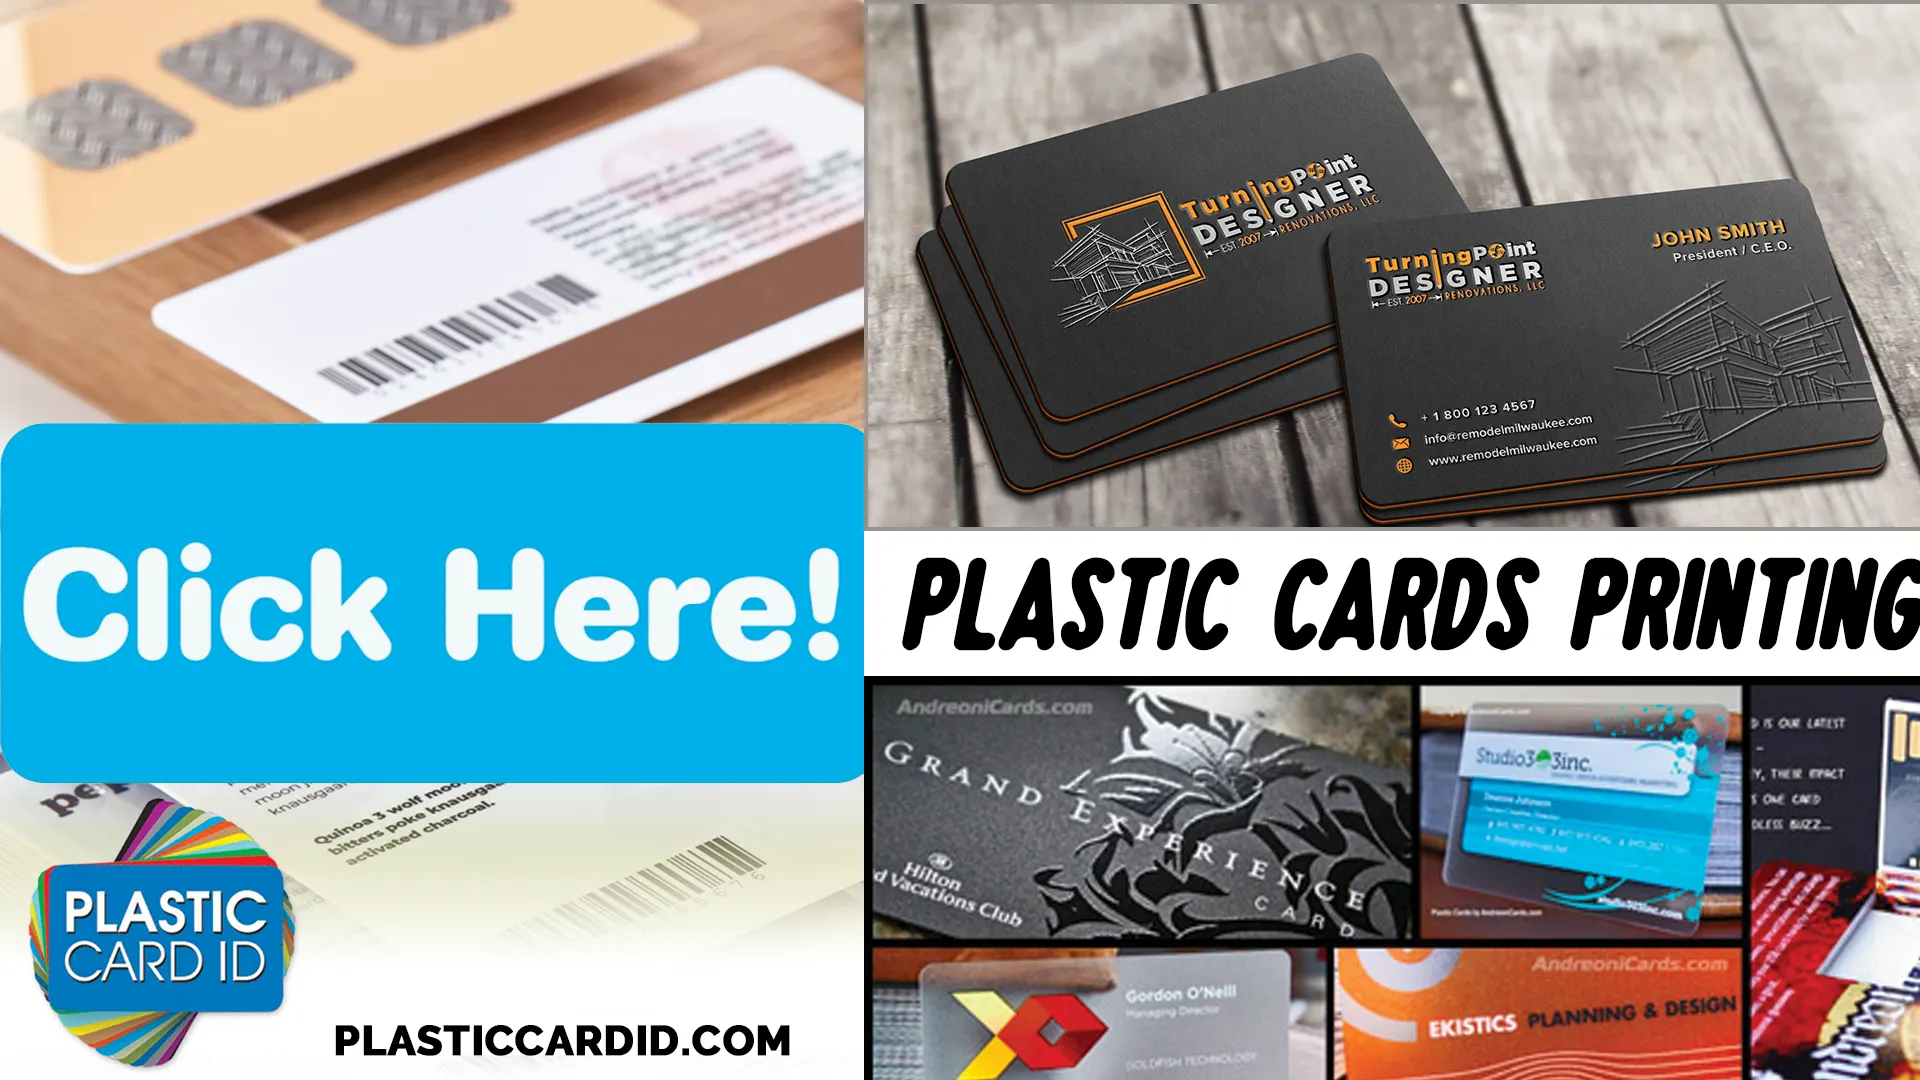 Plastic Card ID




: Experts in Plastic Cards